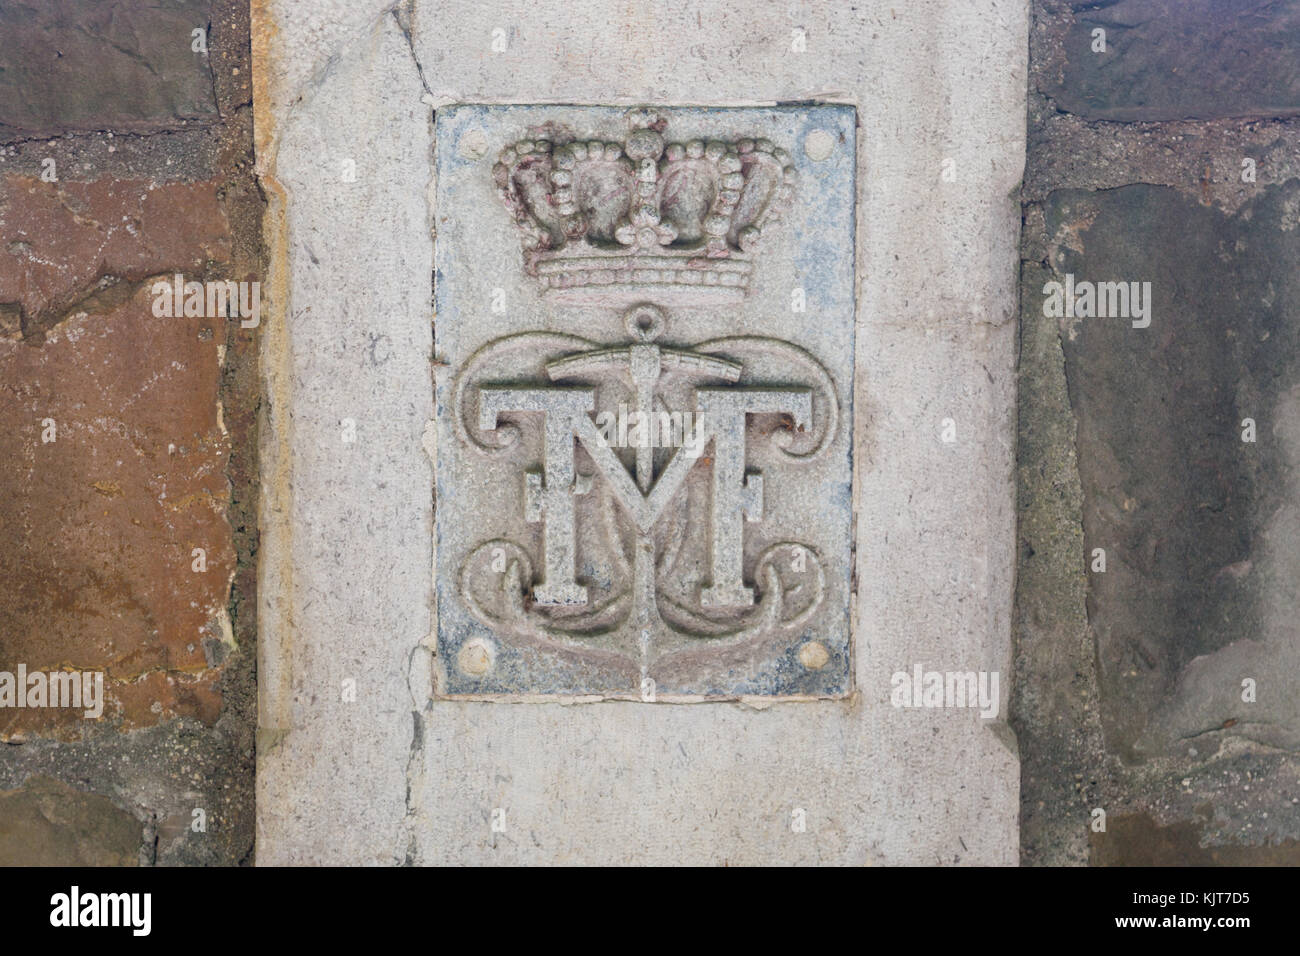 Initials of Mexican Emperor Maximilian and symbols crown and anchor on a stone wall at castle Miramare, Trieste, Italy Stock Photo